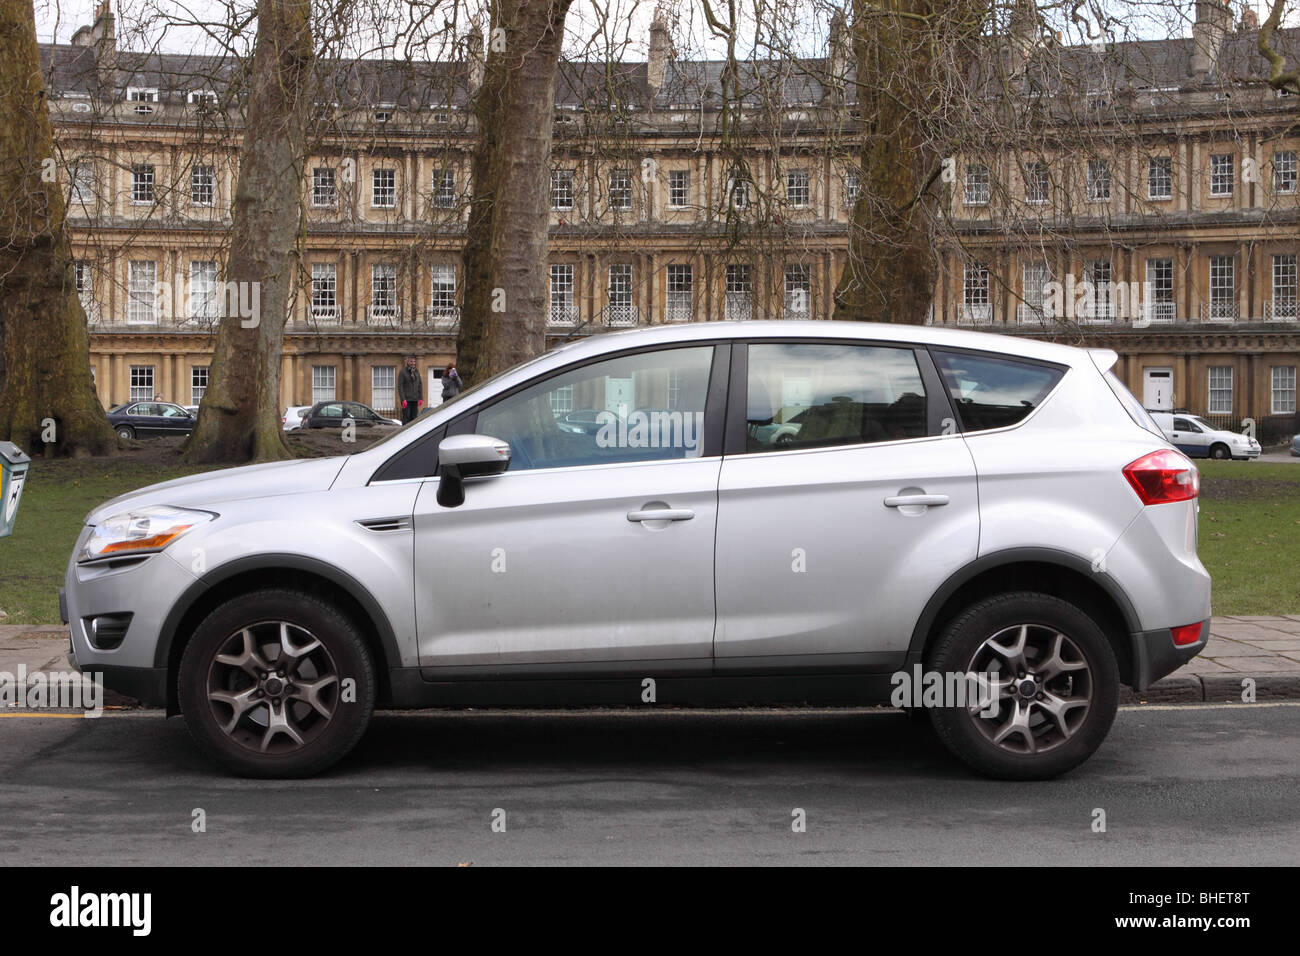 Ford Kuga 2.0 TDCi is a compact crossover SUV car vehicle parked at The Circus in Bath Somerset England UK Stock Photo